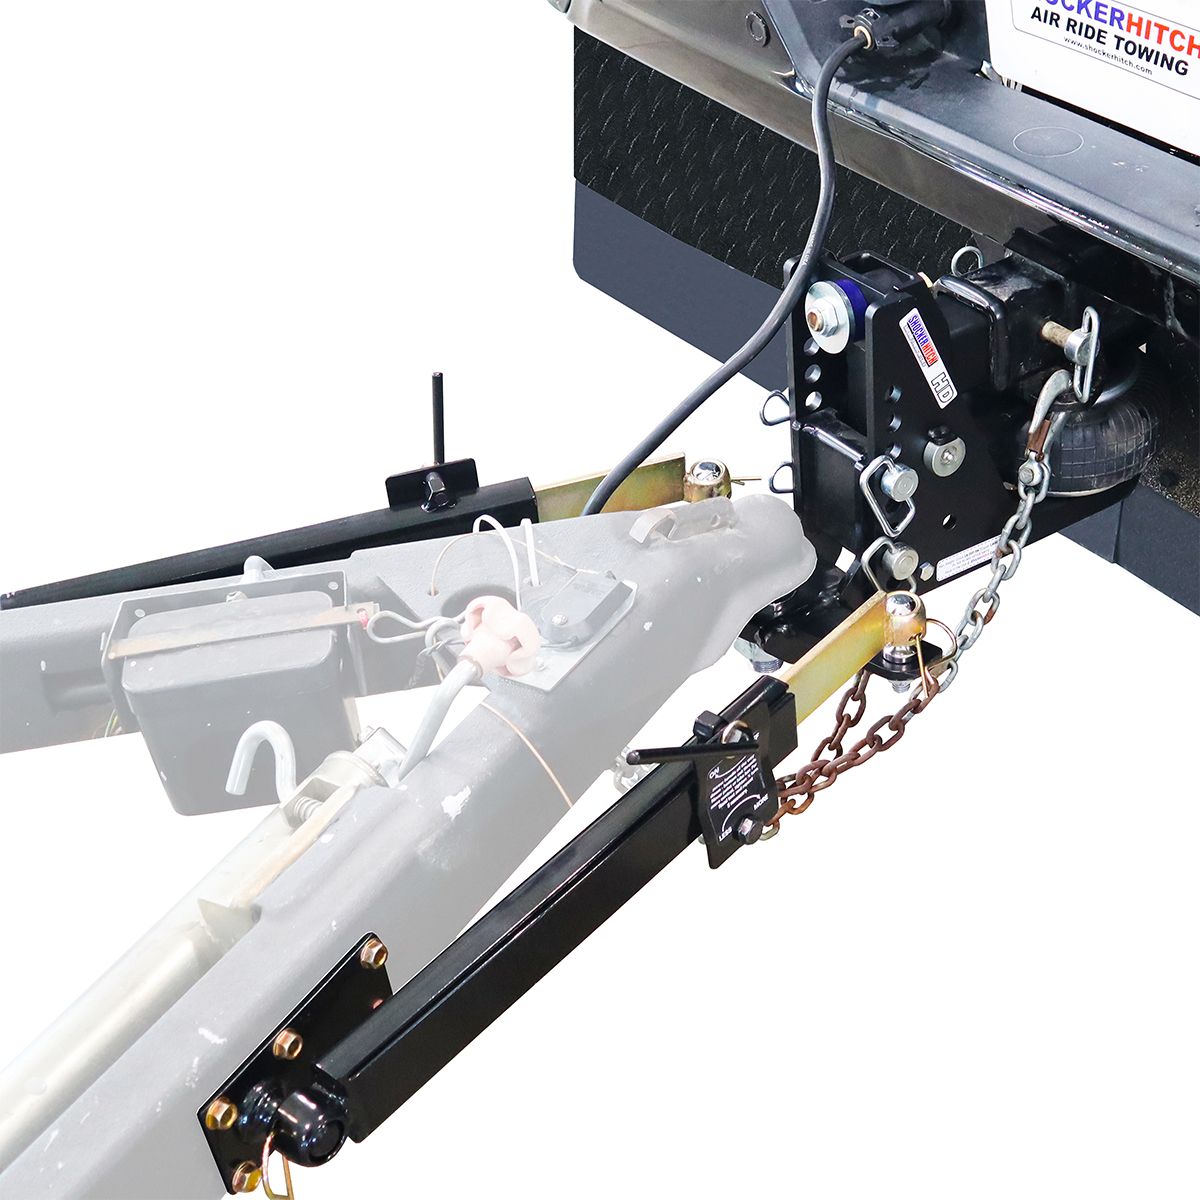 Shocker Hitch Sway Control Towing Kits - View All